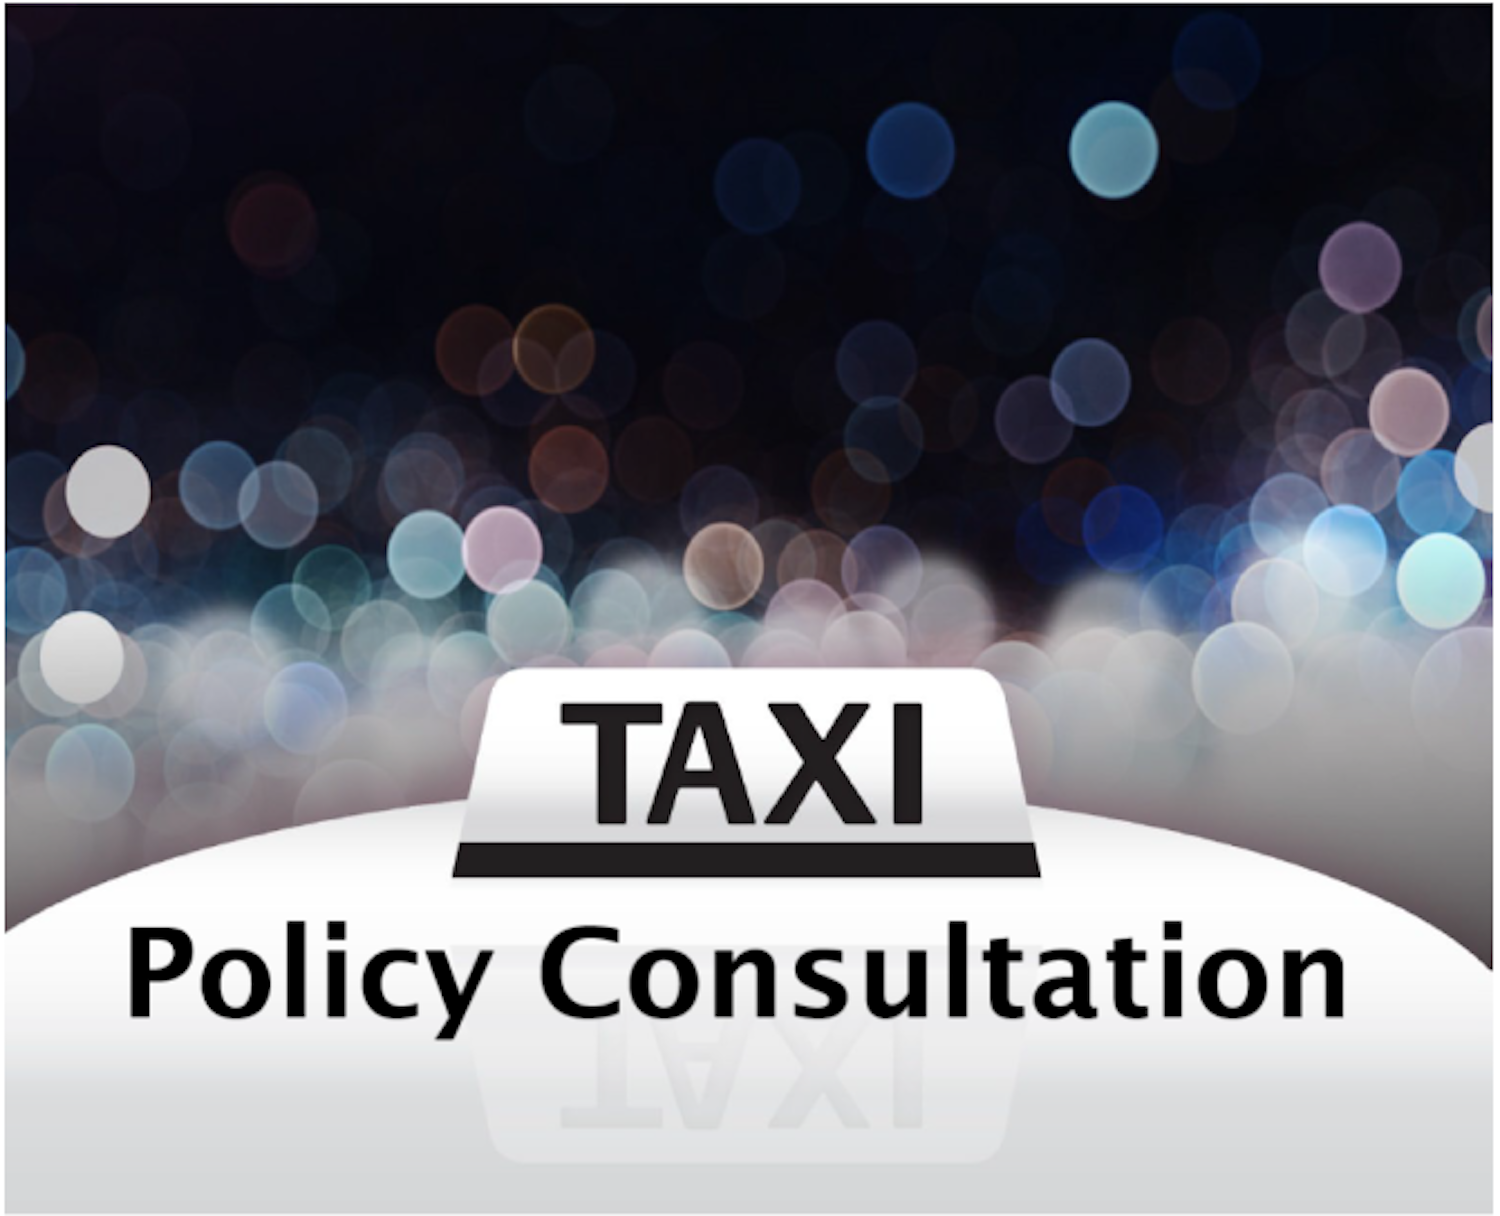 Policy Consultation